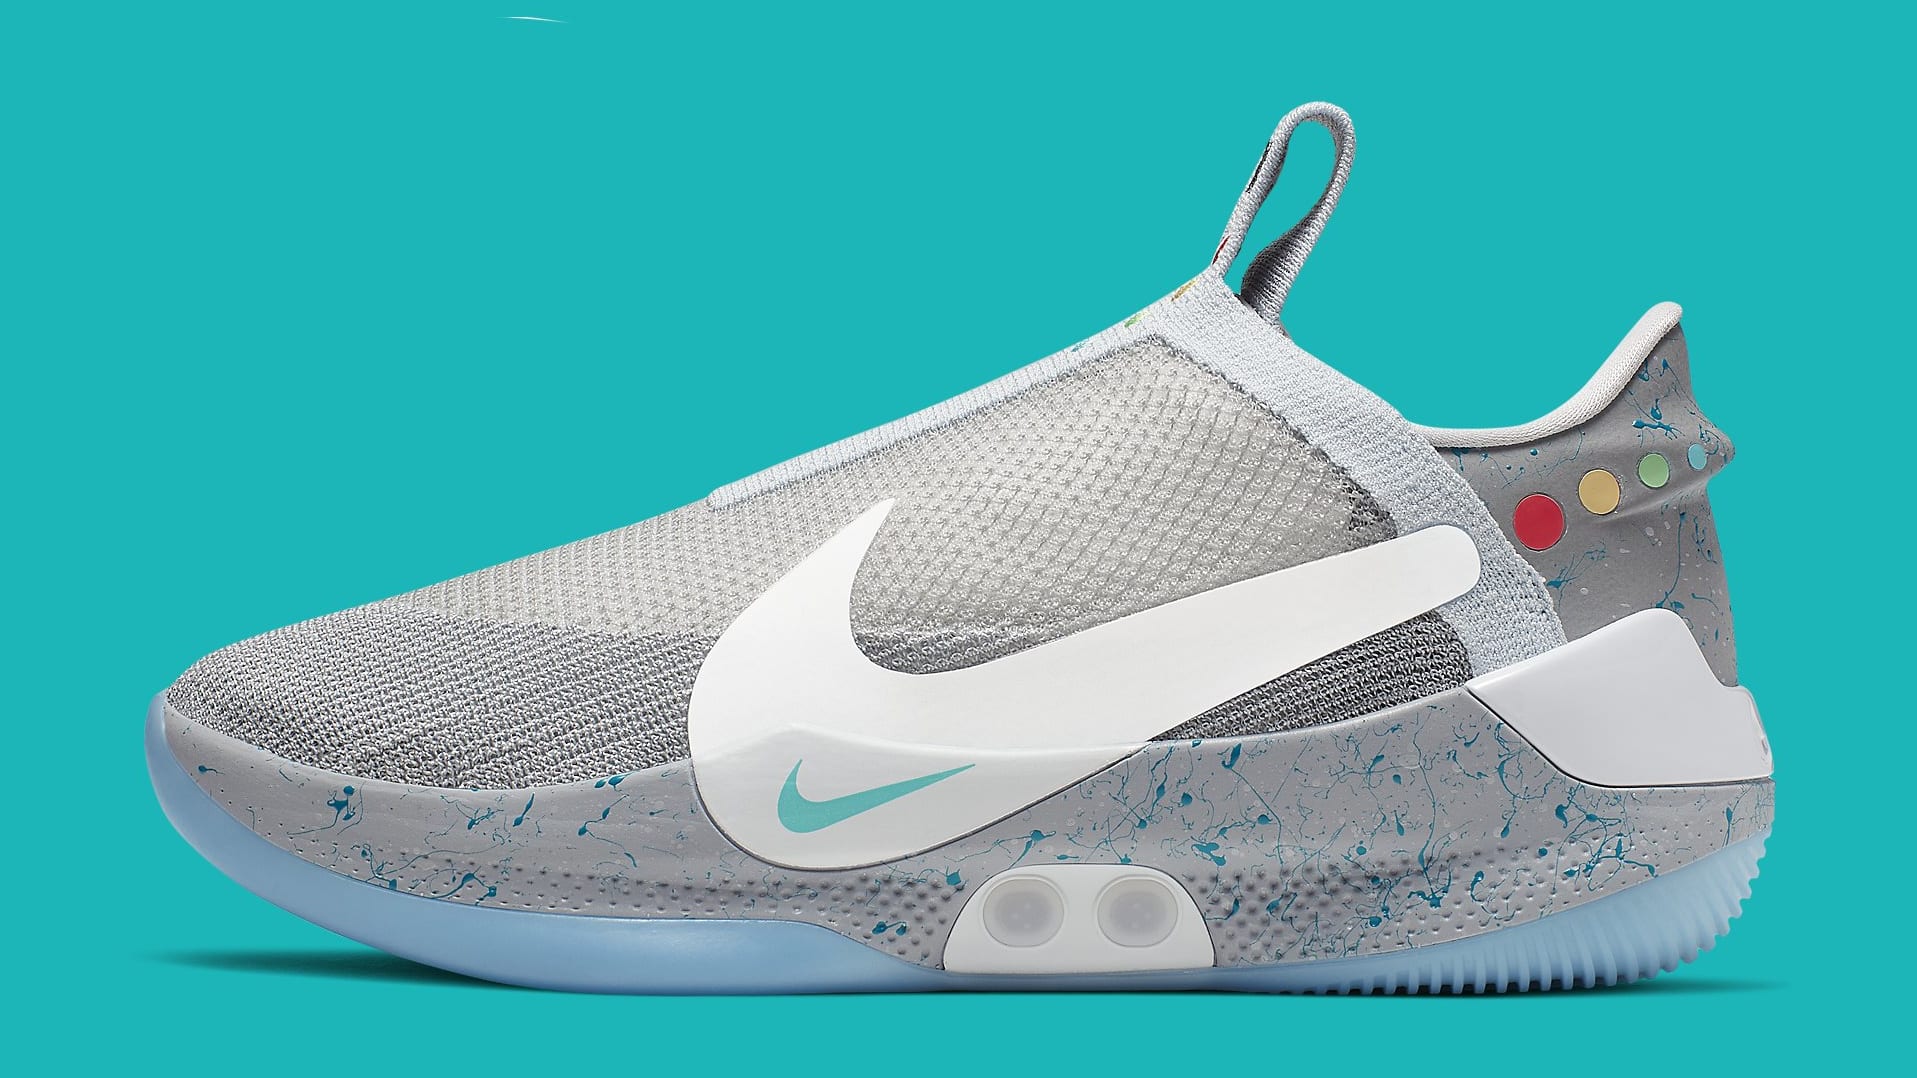 Nike Adapt BB 'Wolf Grey' Wolf Grey/Multi-Color AO2582-002 Lateral